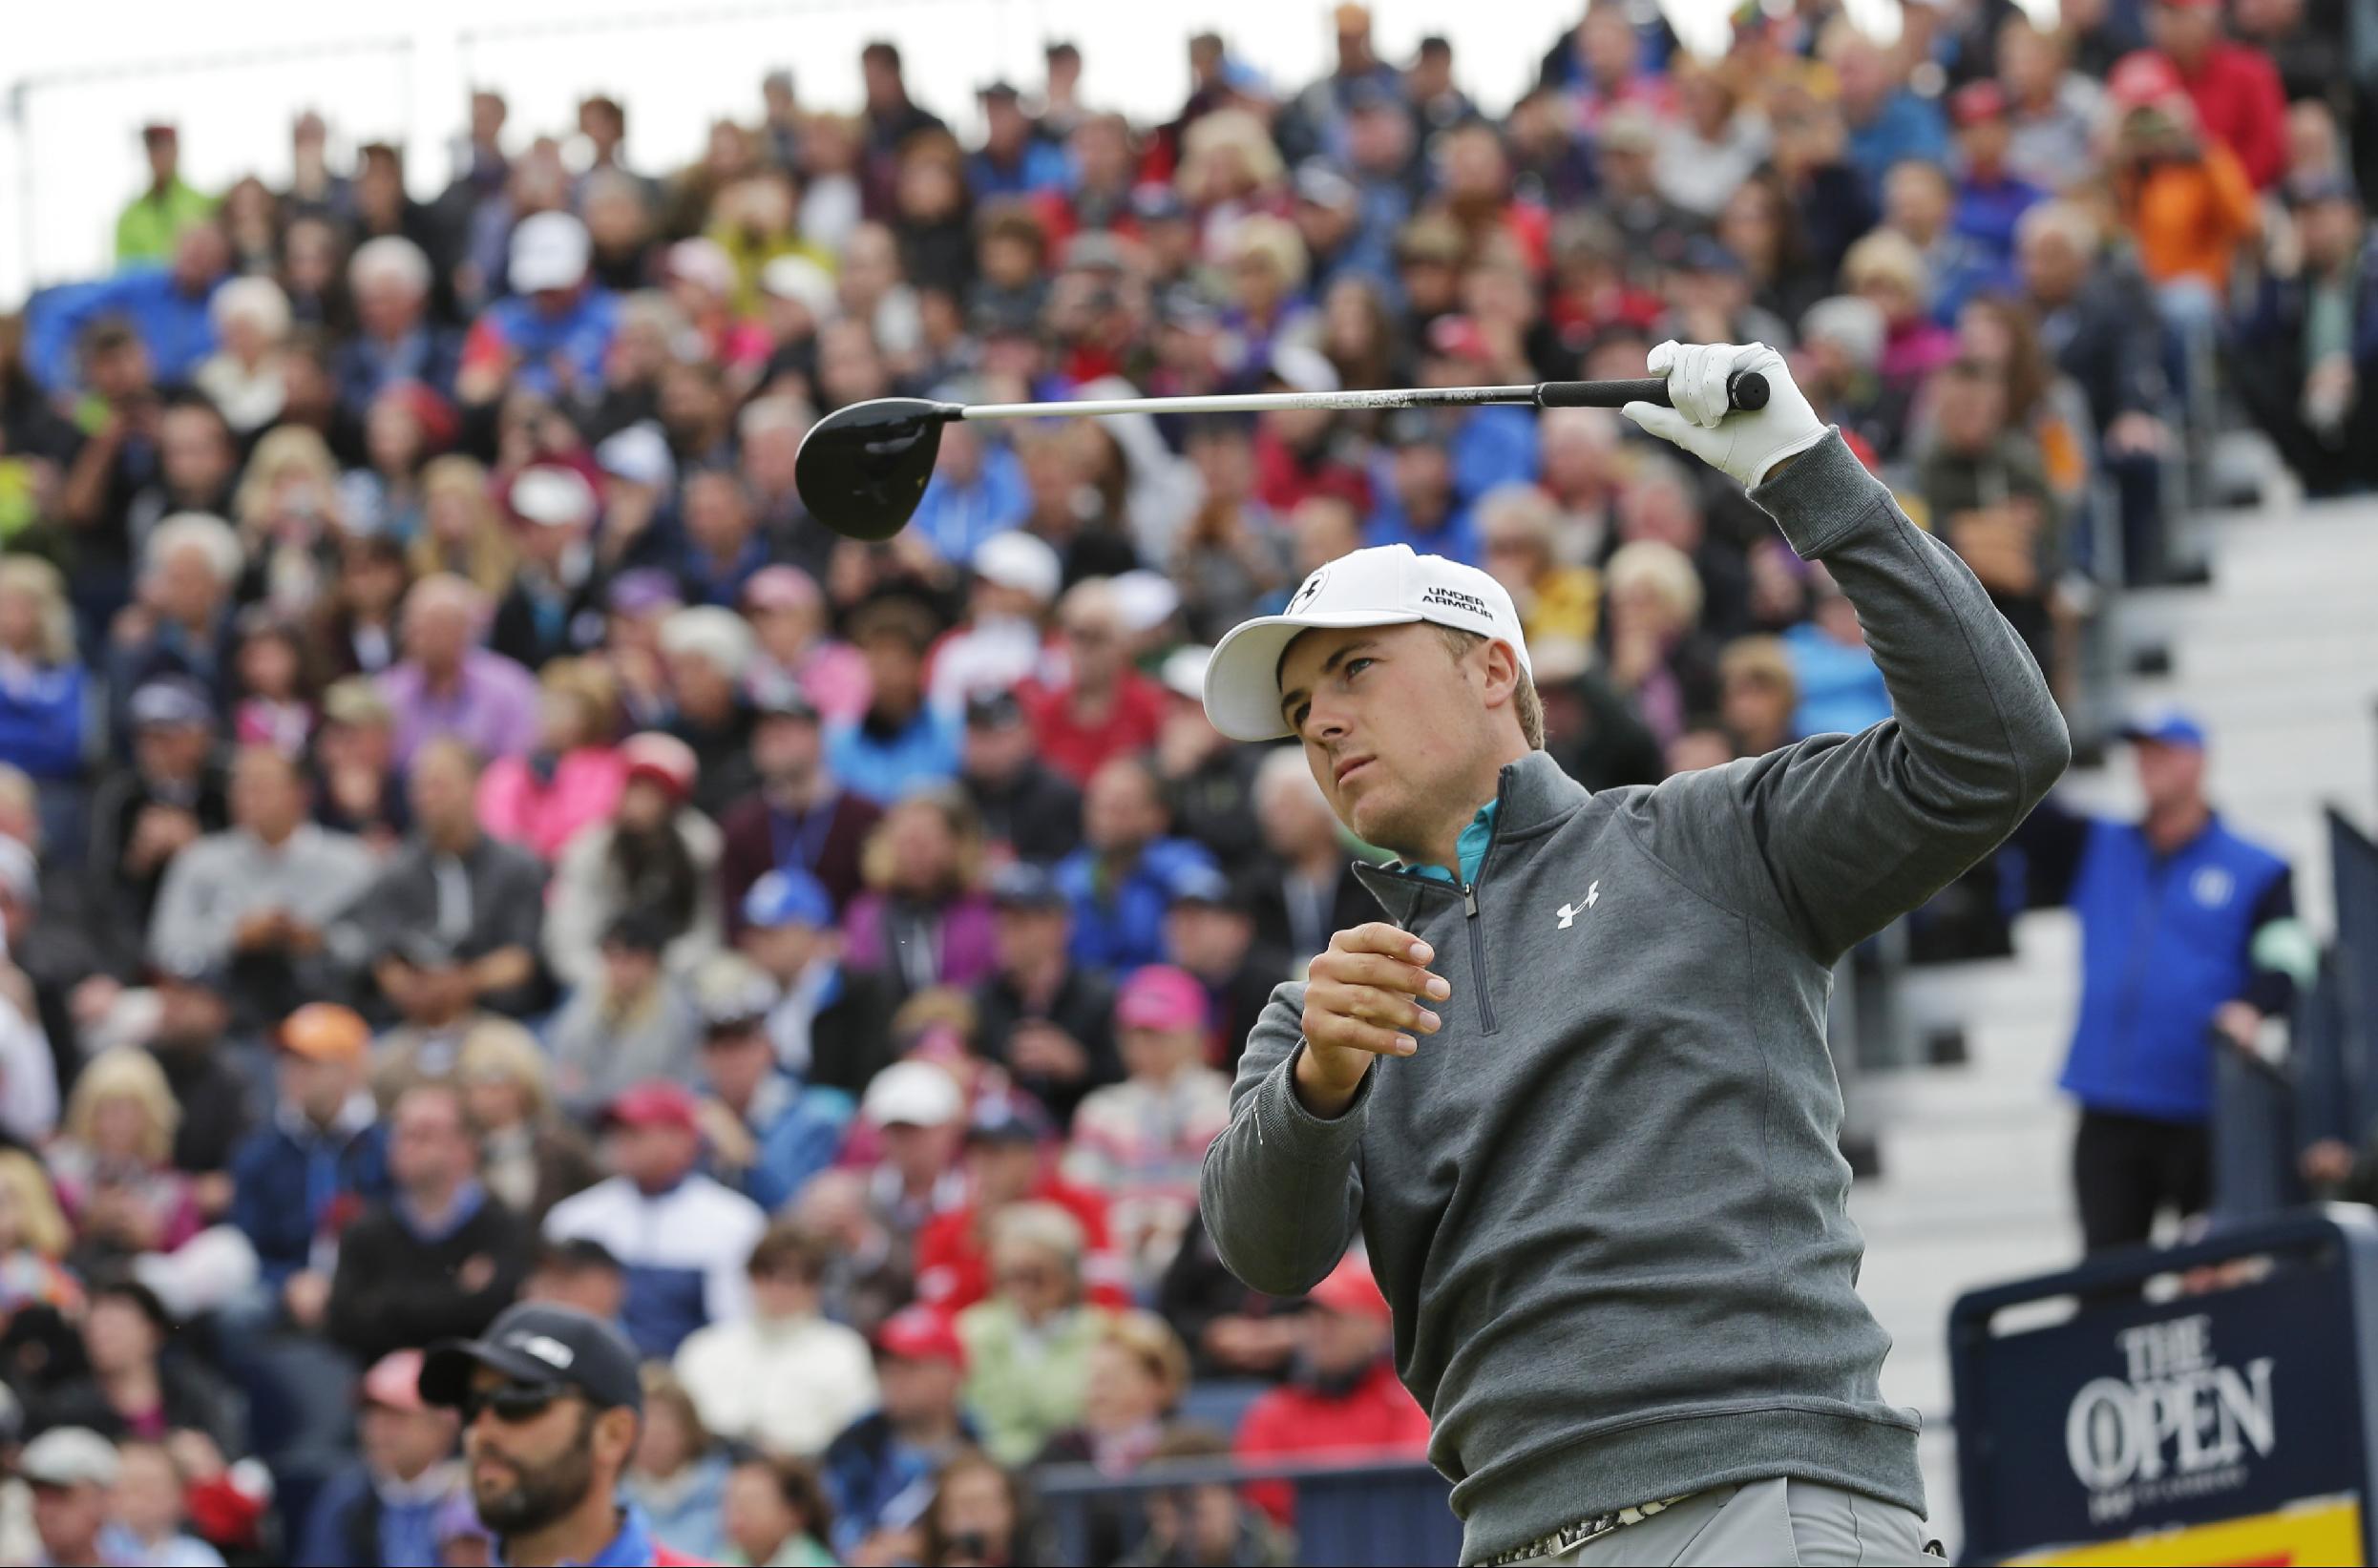 Jordan Spieth plays from the 17th tee during the third round at the British Open. (AP)